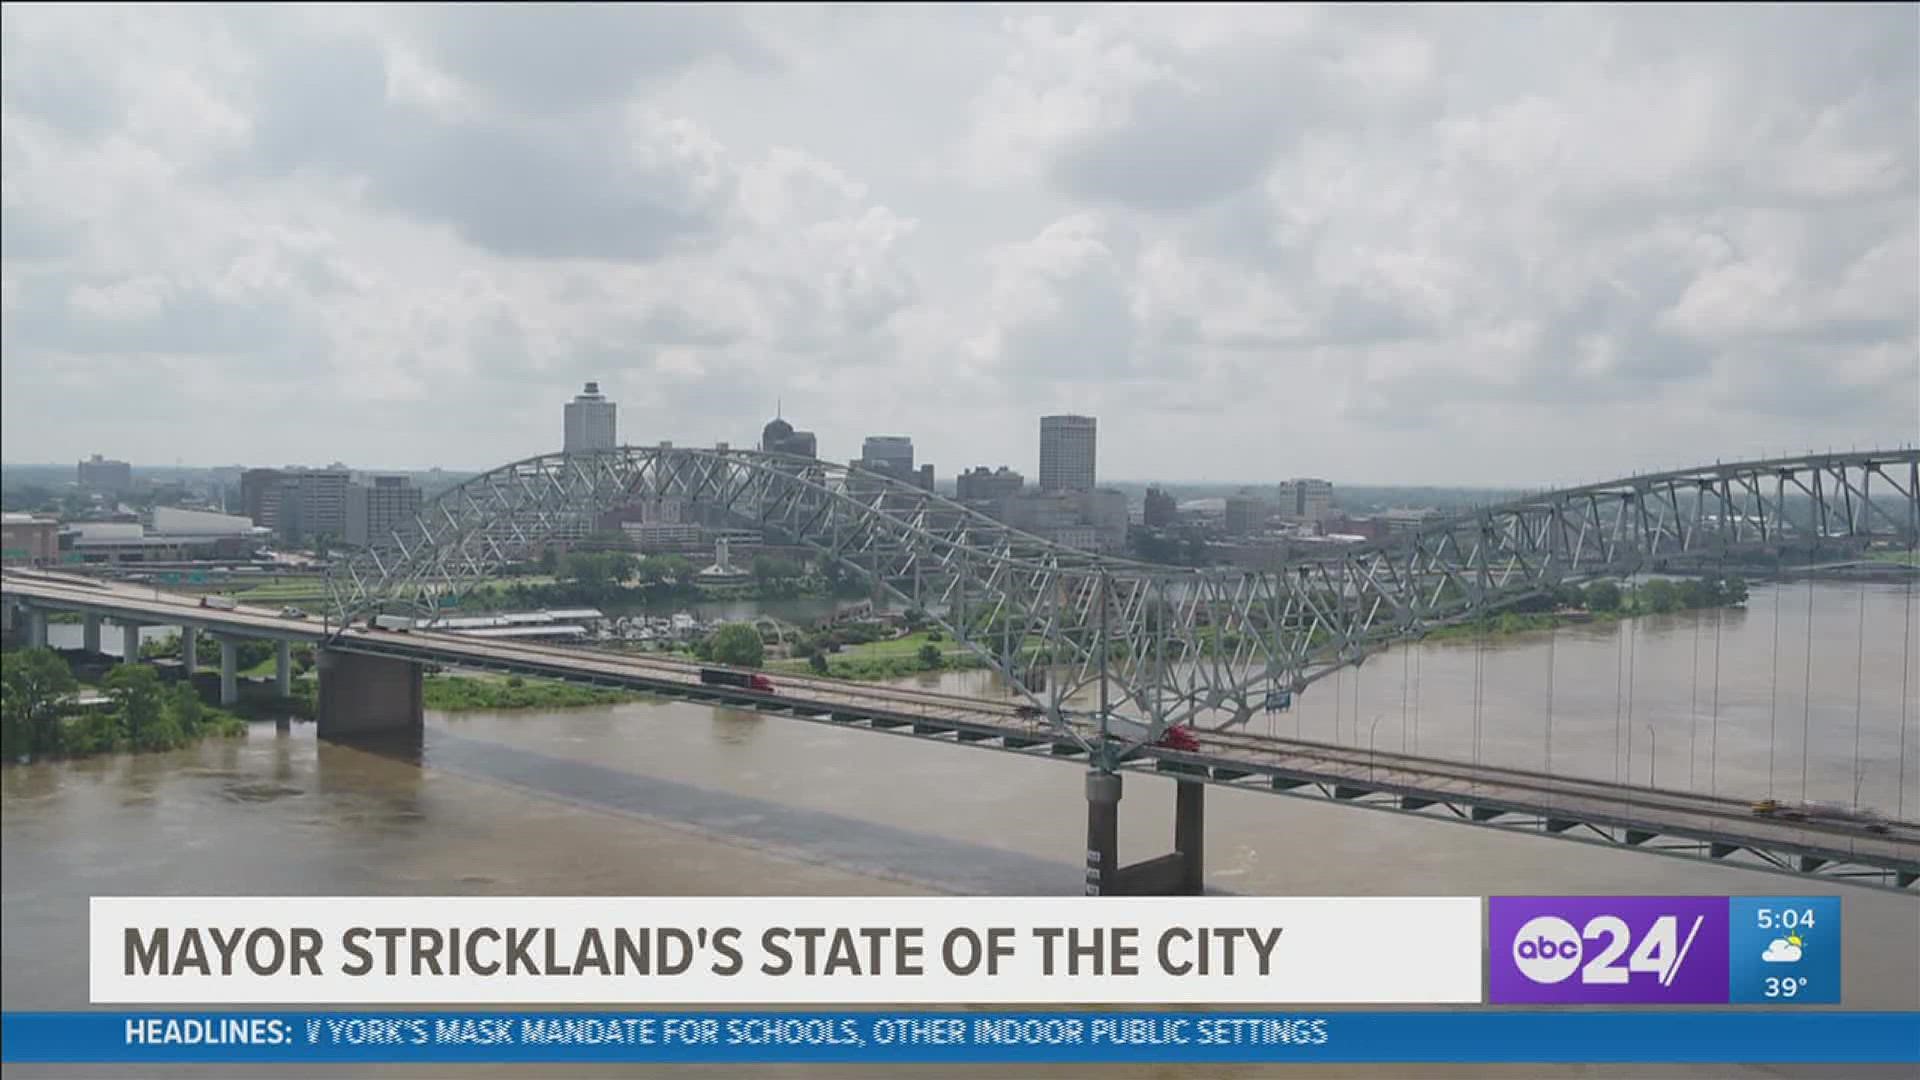 In his statement, Strickland talked about the city's plan to address crime, the state of the economy, and a "transformative reallocation" of tax dollars.